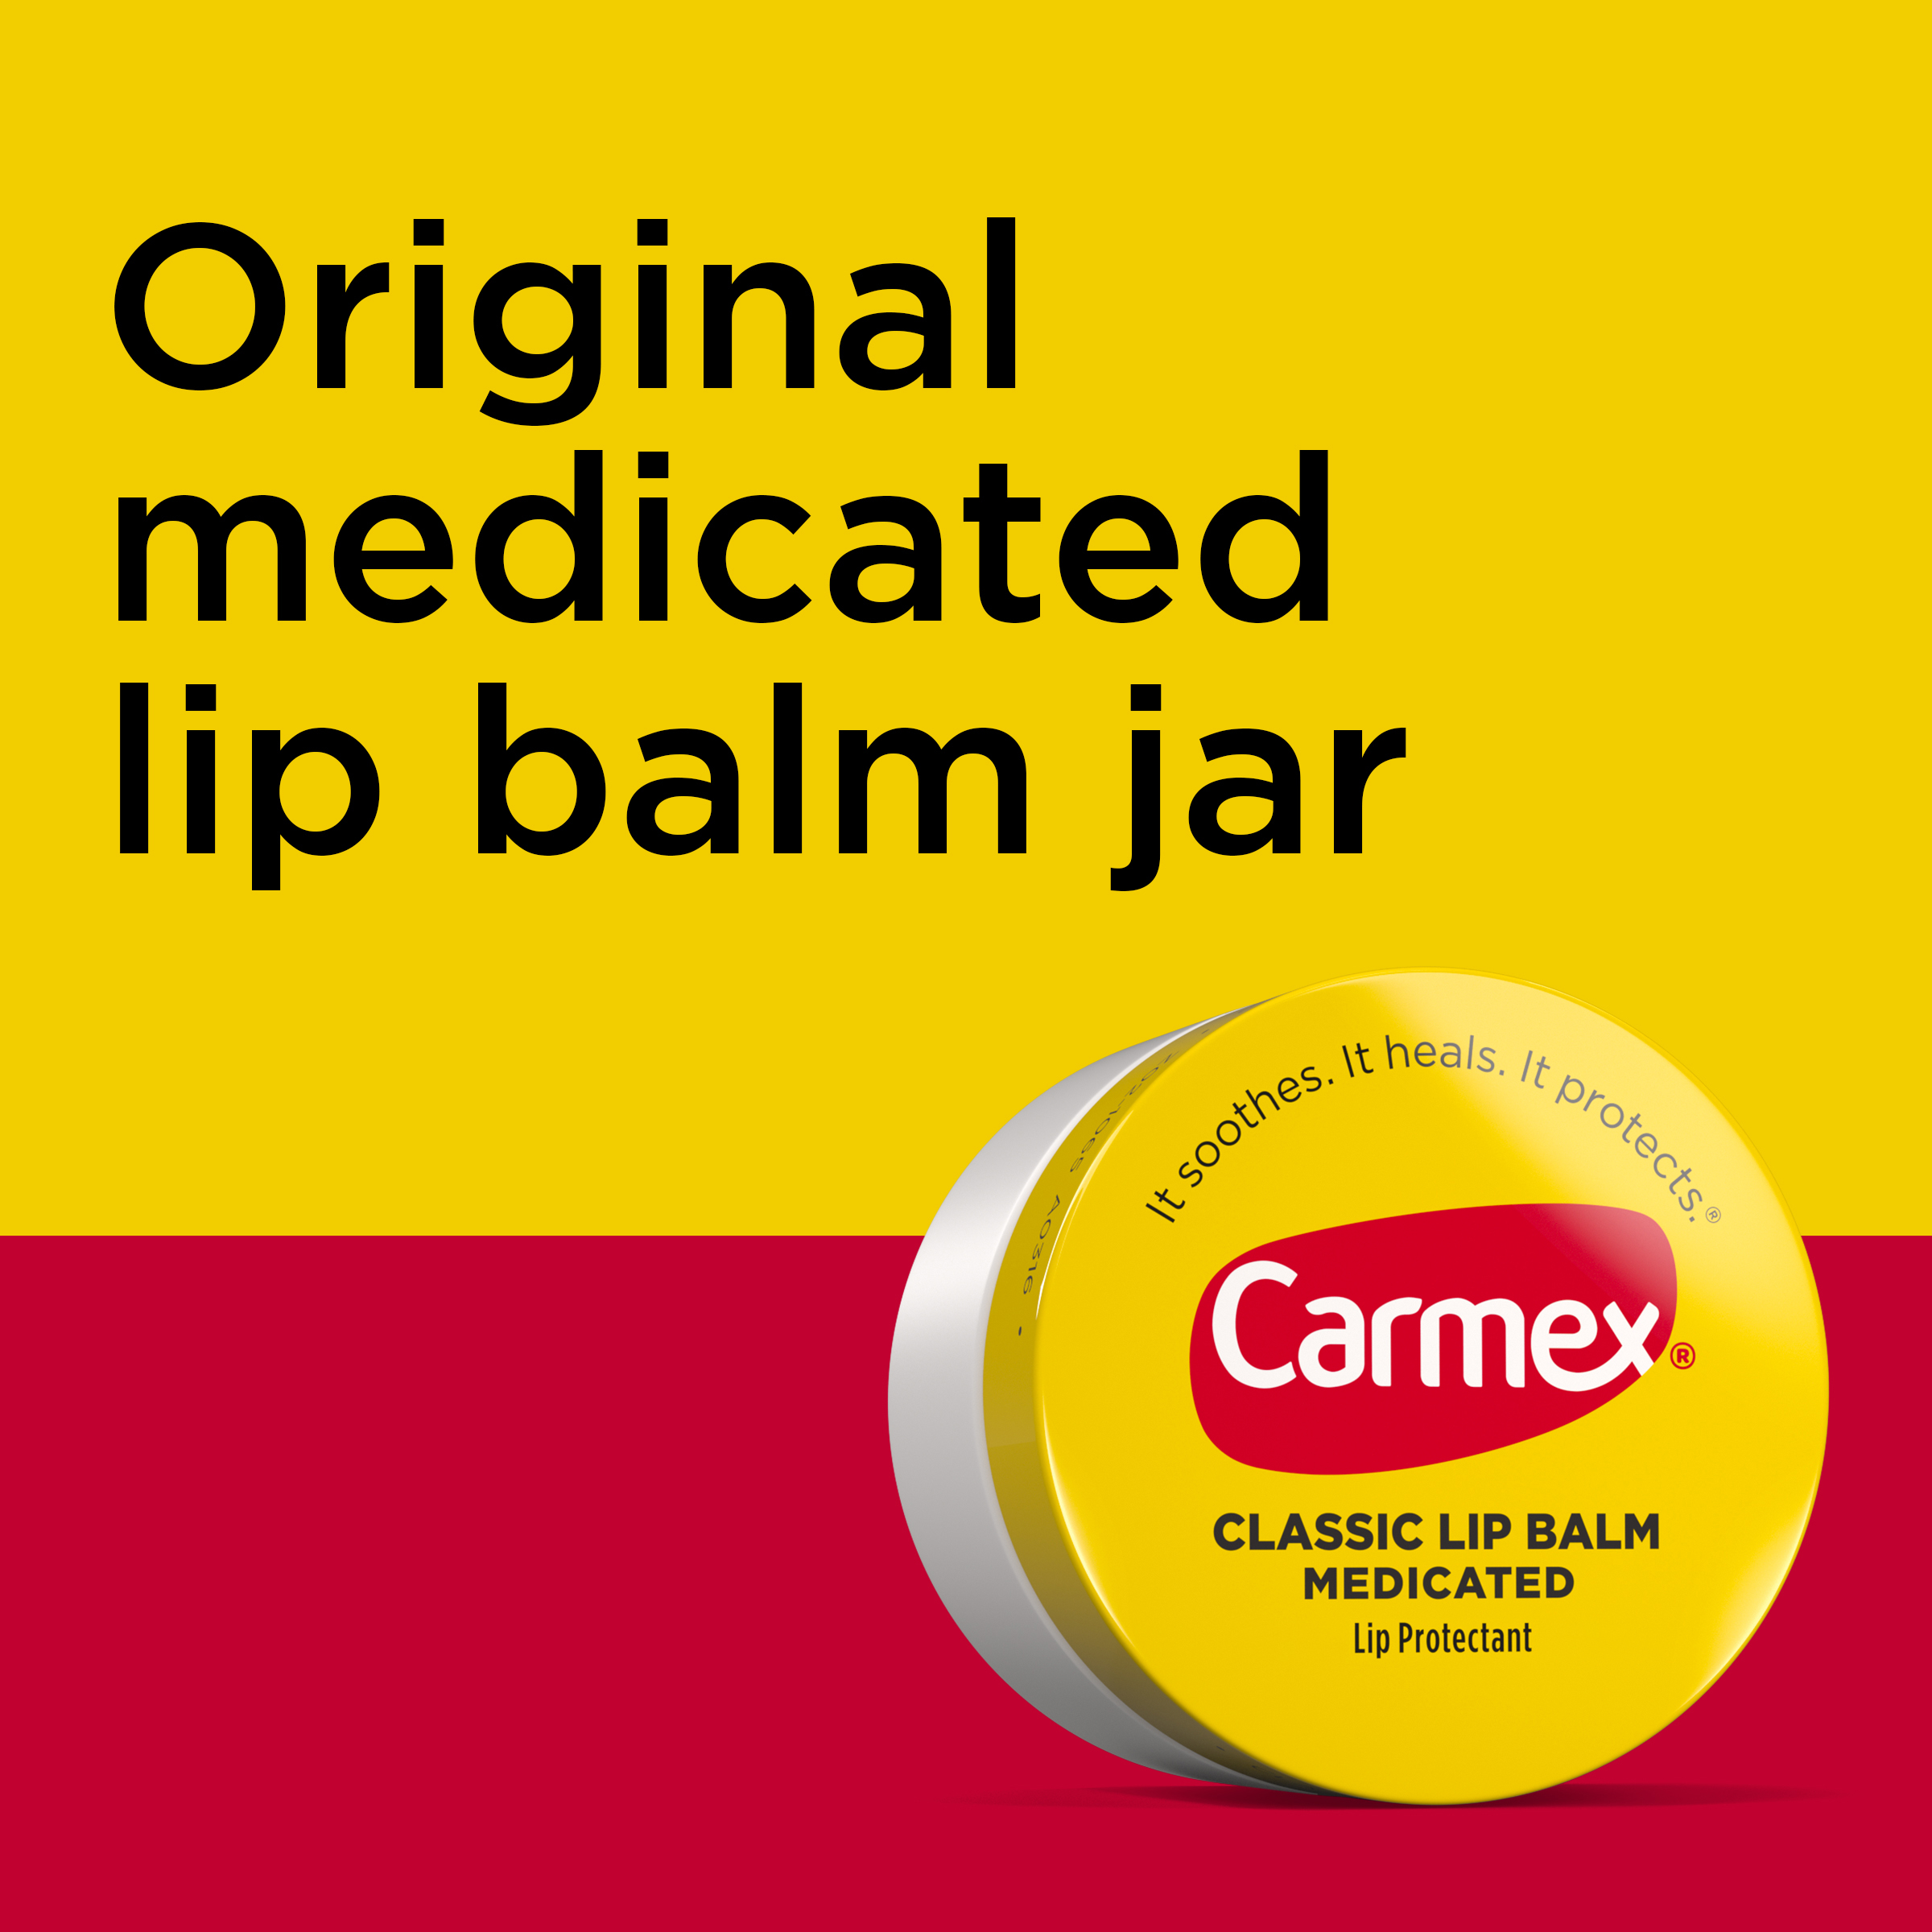 Carmex Classic Medicated Lip Balm Jars, Lip Moisturizer, 3 Count (1 Pack of 3) - image 3 of 12